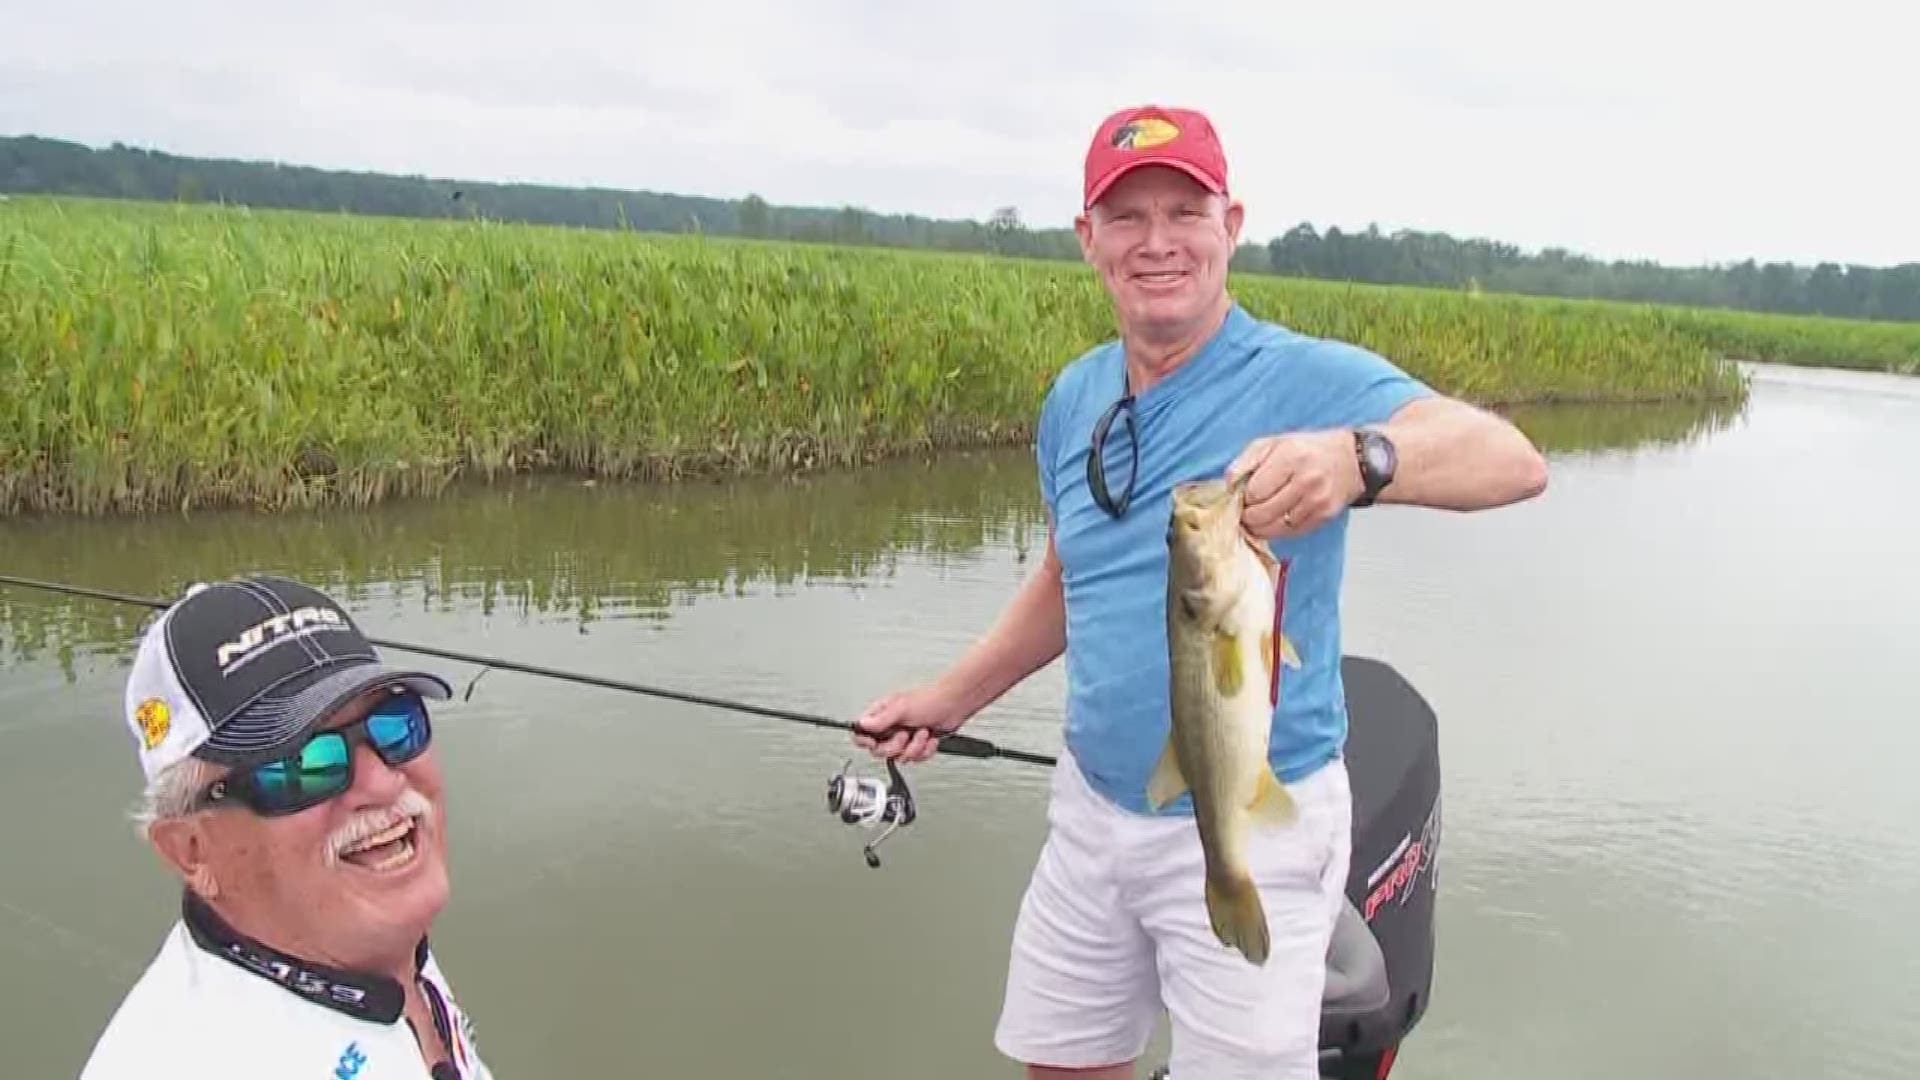 A fun day on the Chickahominy River fishing with Bass Pro Shops pro "Catfish" Hunter